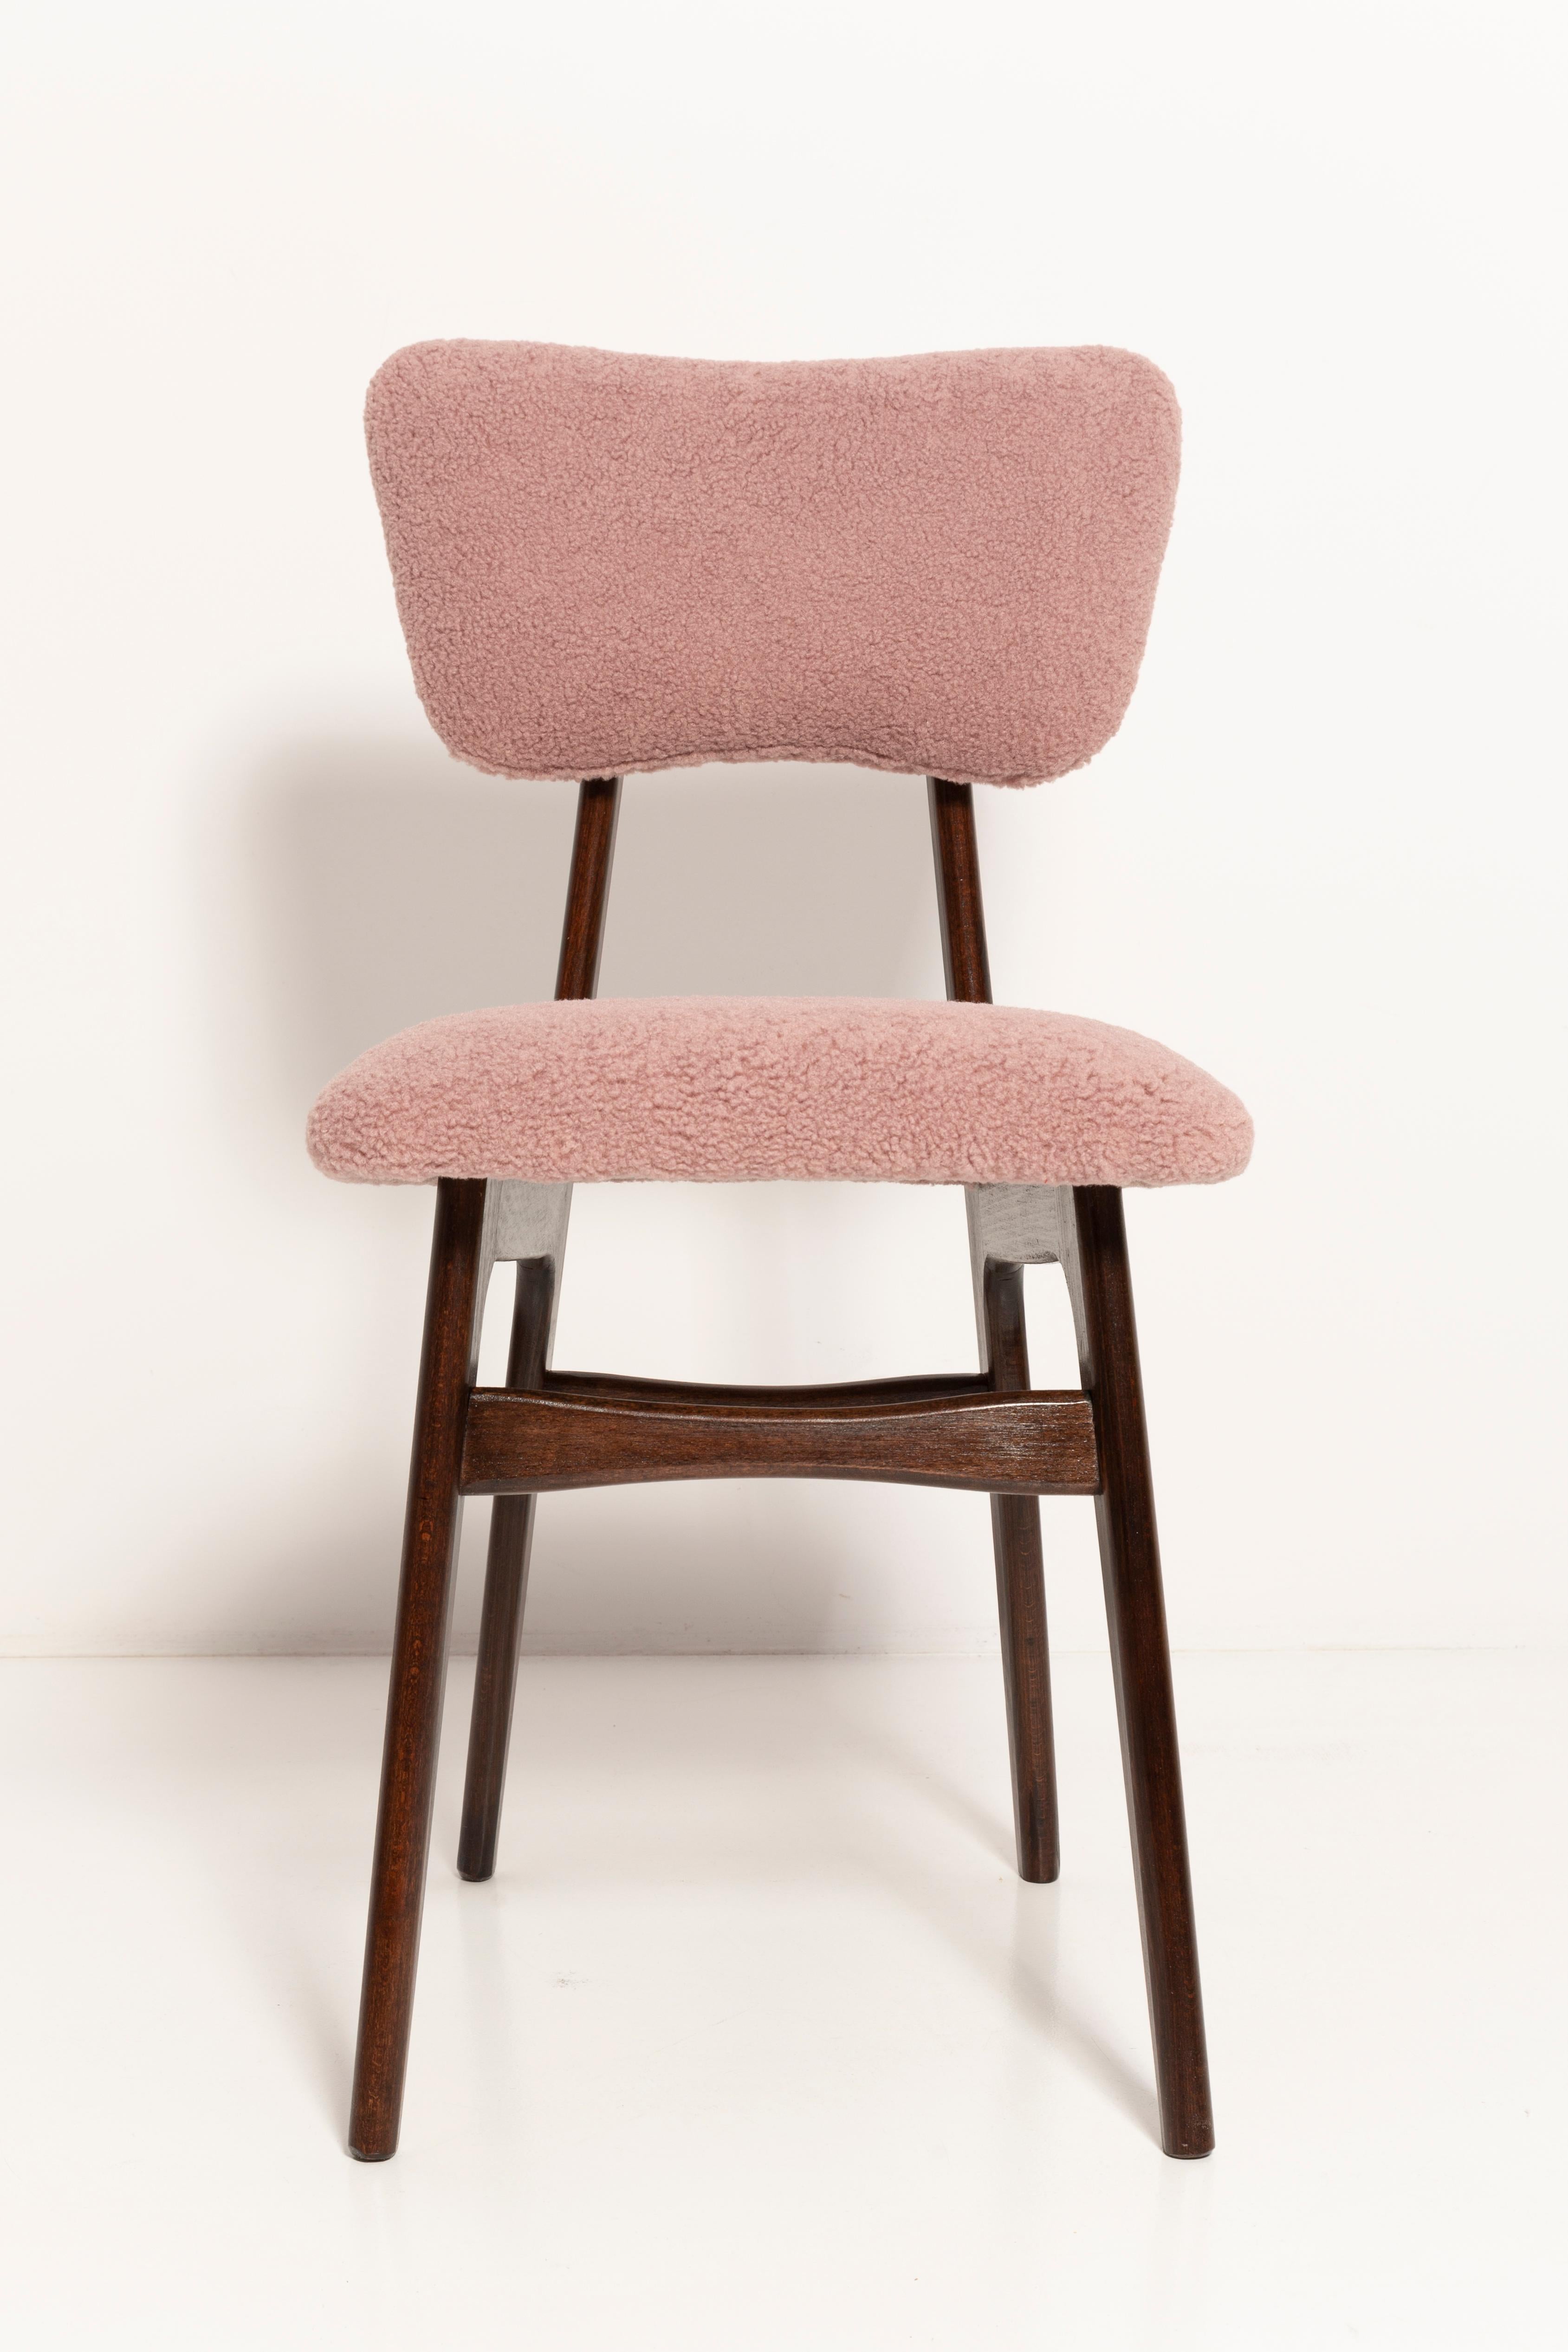 Set of Four Mid Century Butterfly Dining Chairs, Pink Boucle, Europe, 1960s For Sale 7